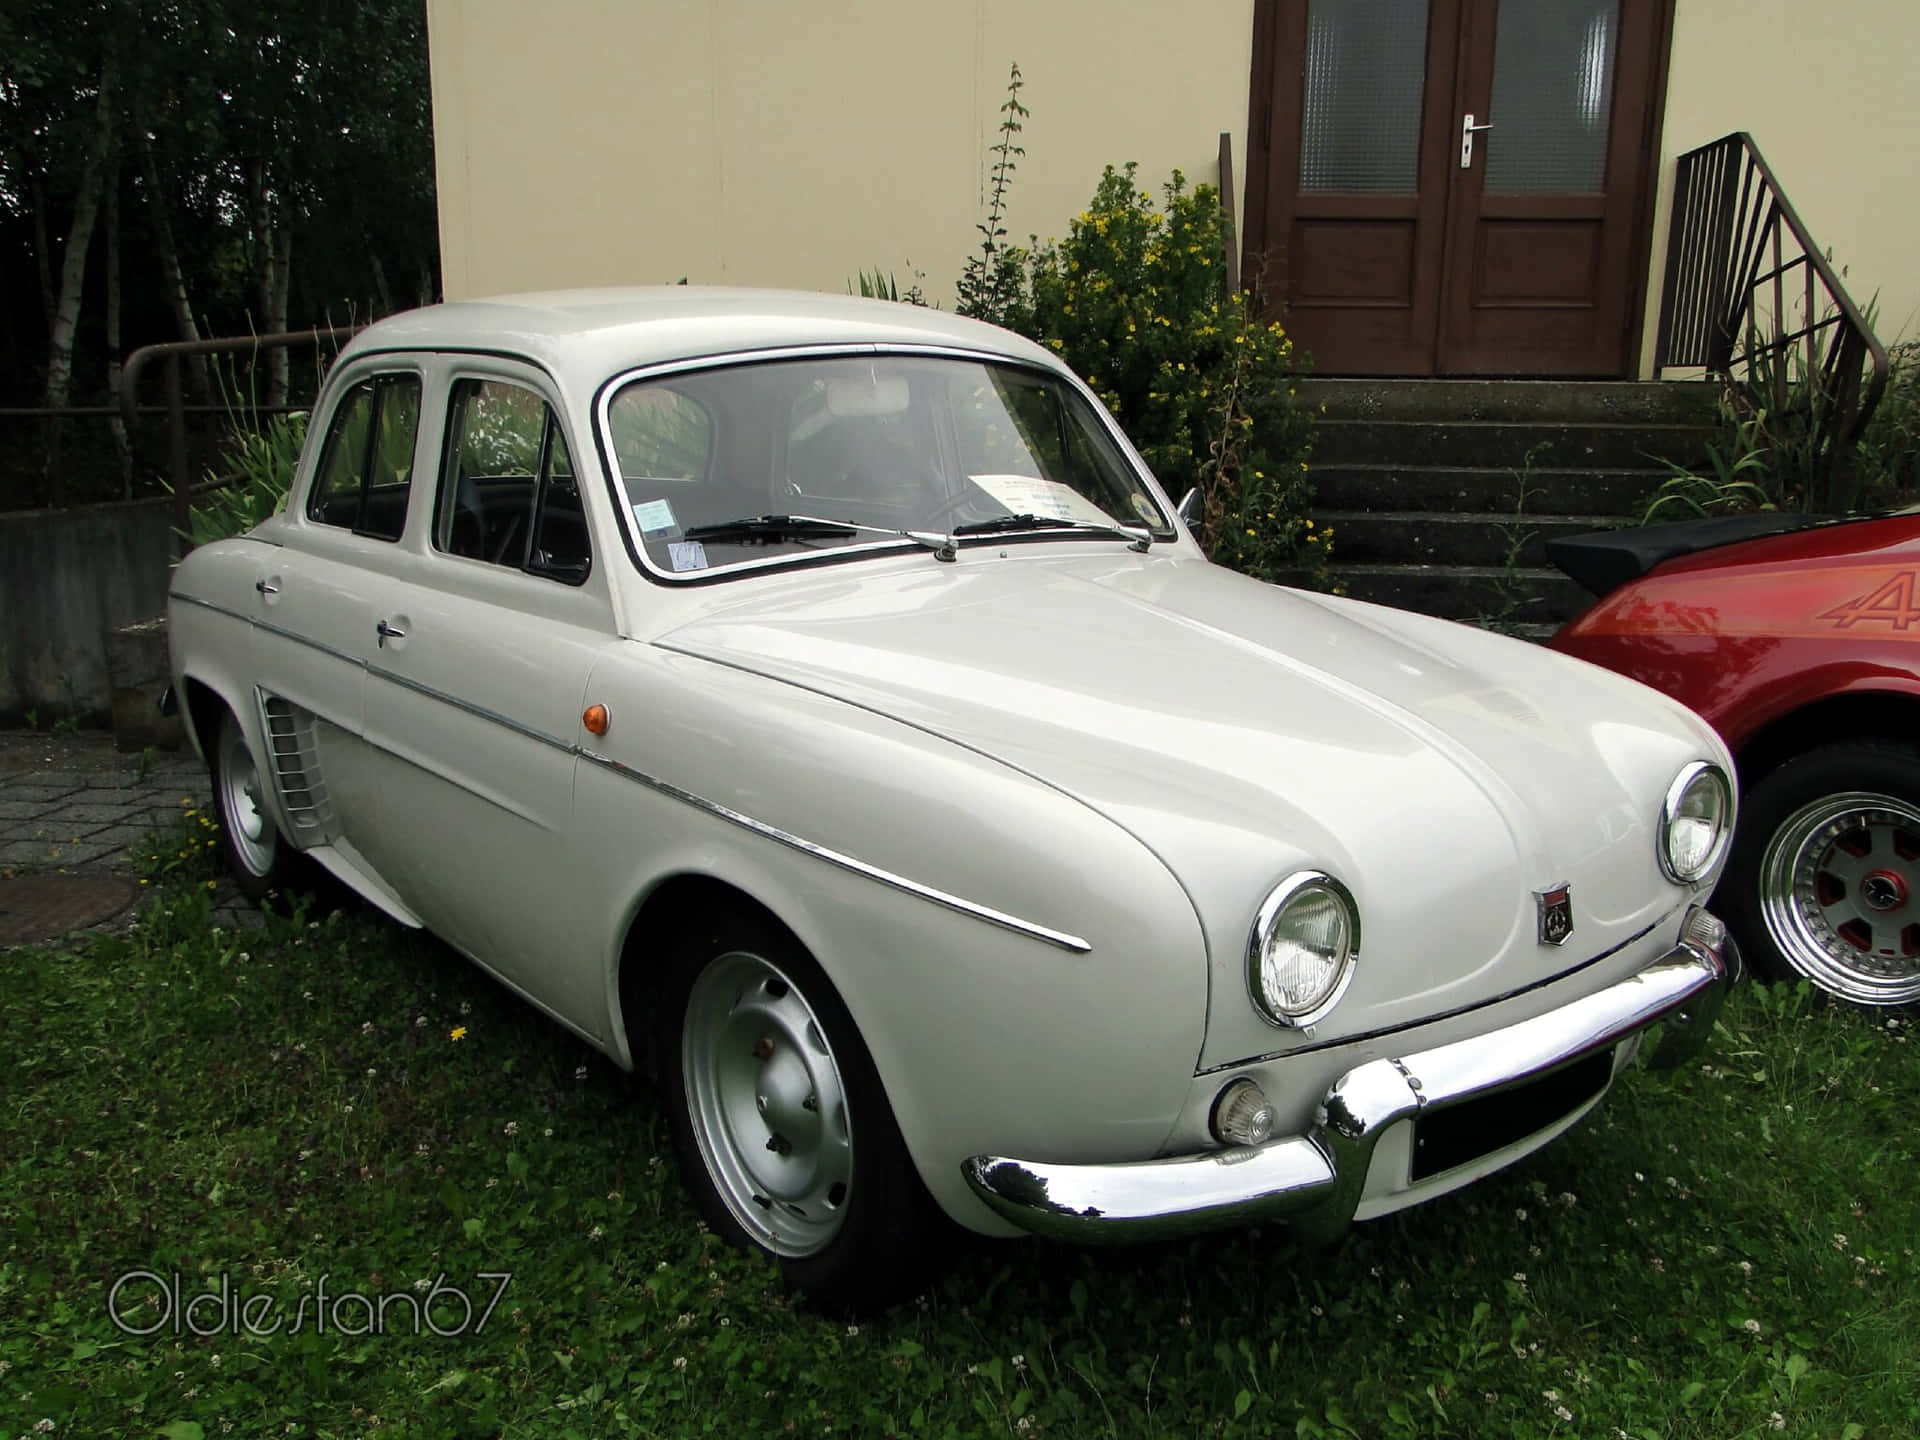 Vintage Renault Dauphine Parked On The Street Wallpaper